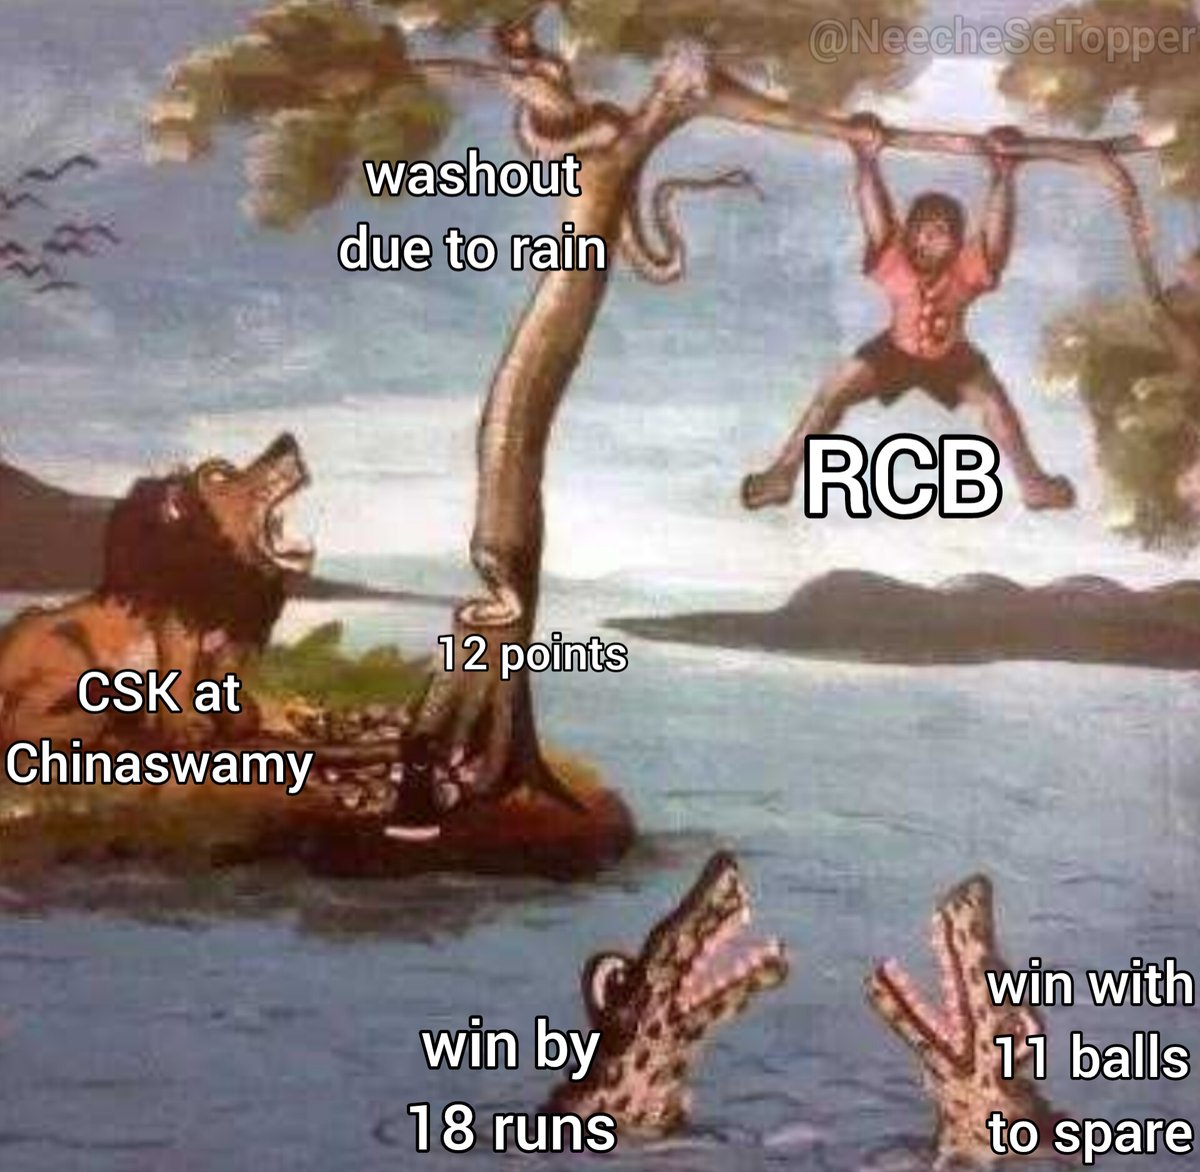 rcb playoff situation reminds me of this famous internet puzzle 😭